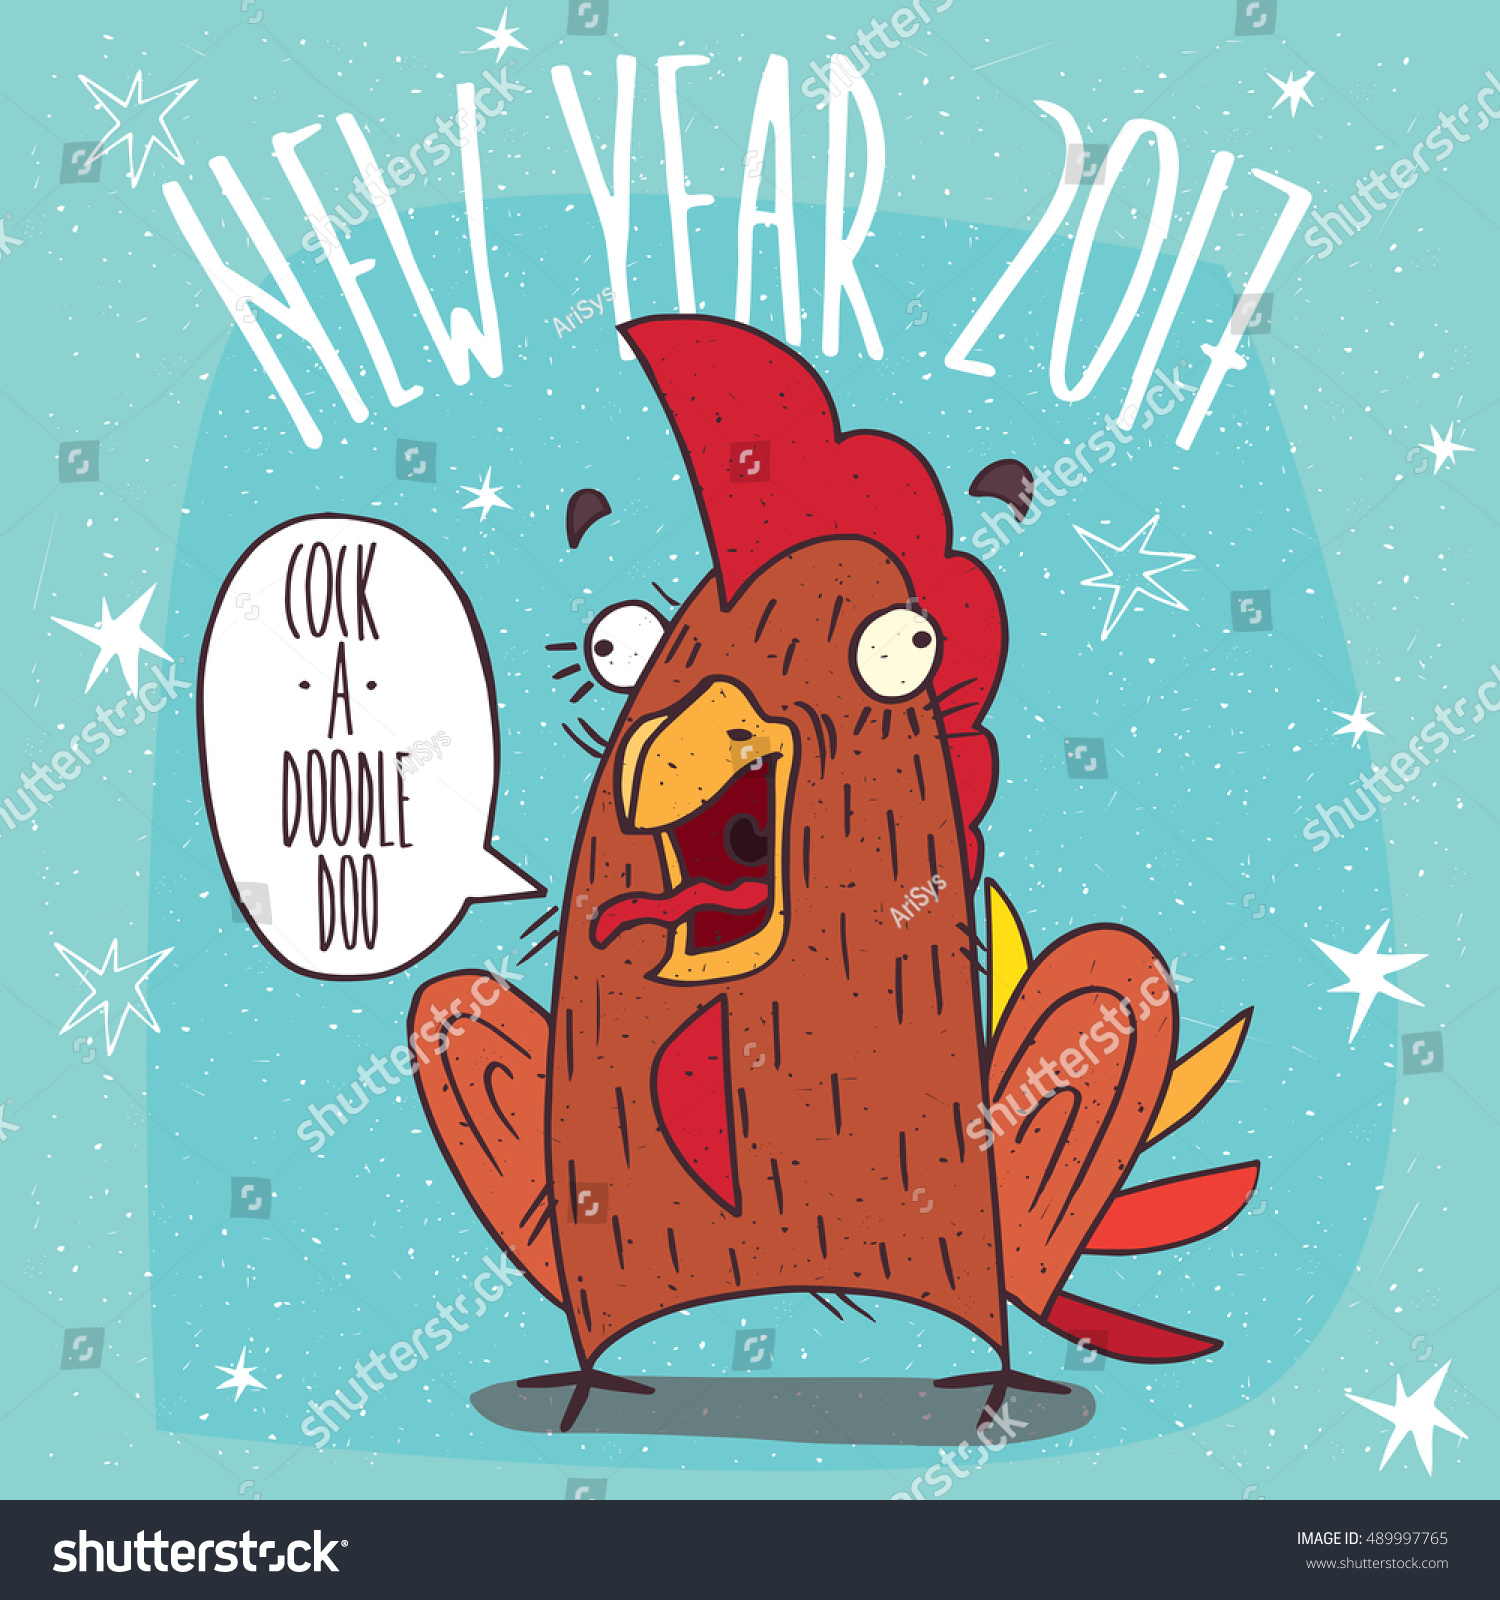 SVG of Cartoon funny cock or rooster with her mouth open stands and screaming Cock a doodle doo. Blue background with stars and New Year 2017 lettering. Vector illustration svg